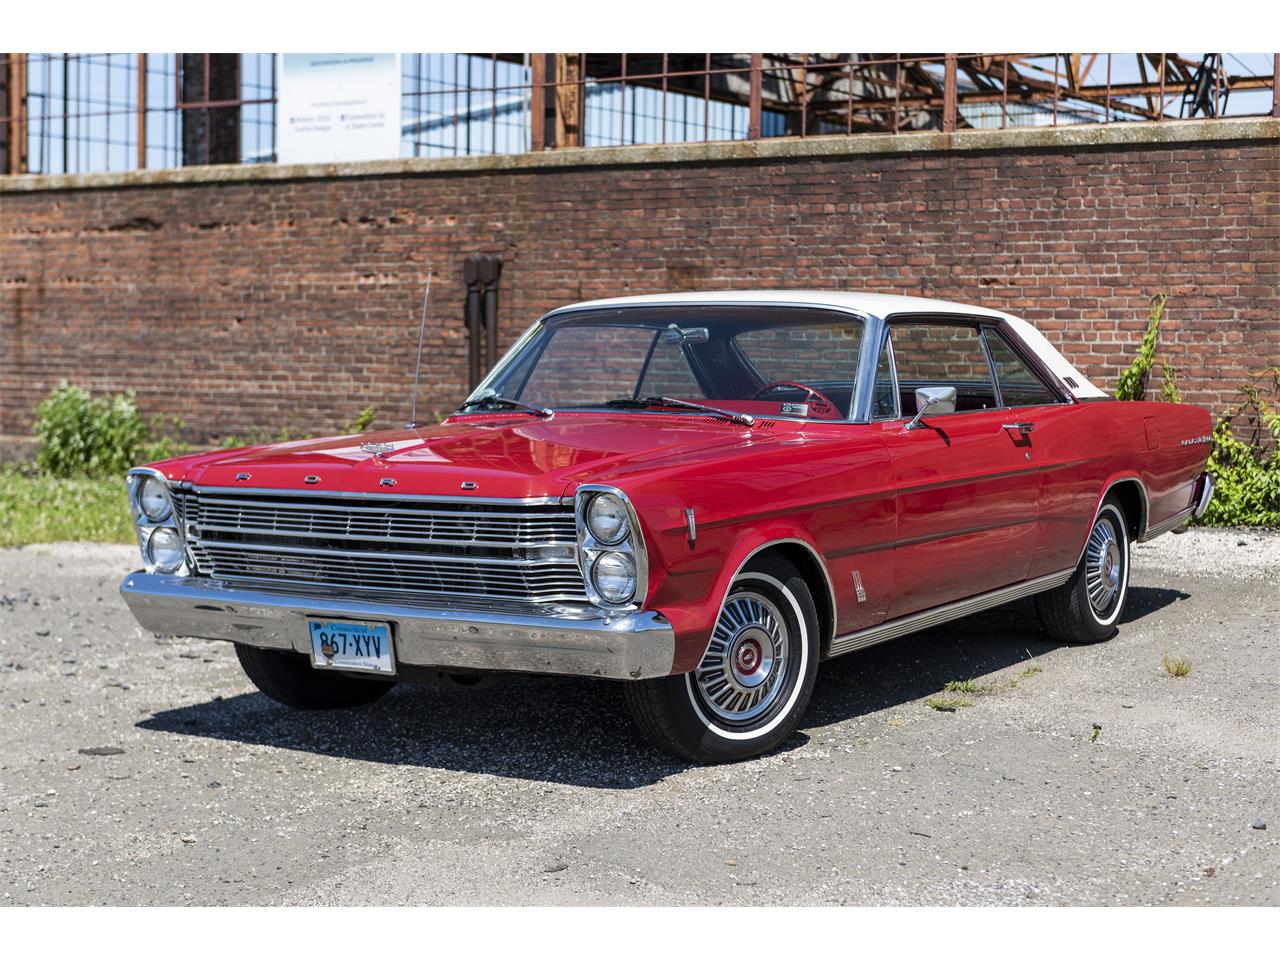 For Sale: 1966 Ford Galaxie 500 in Stratford, Connecticut.